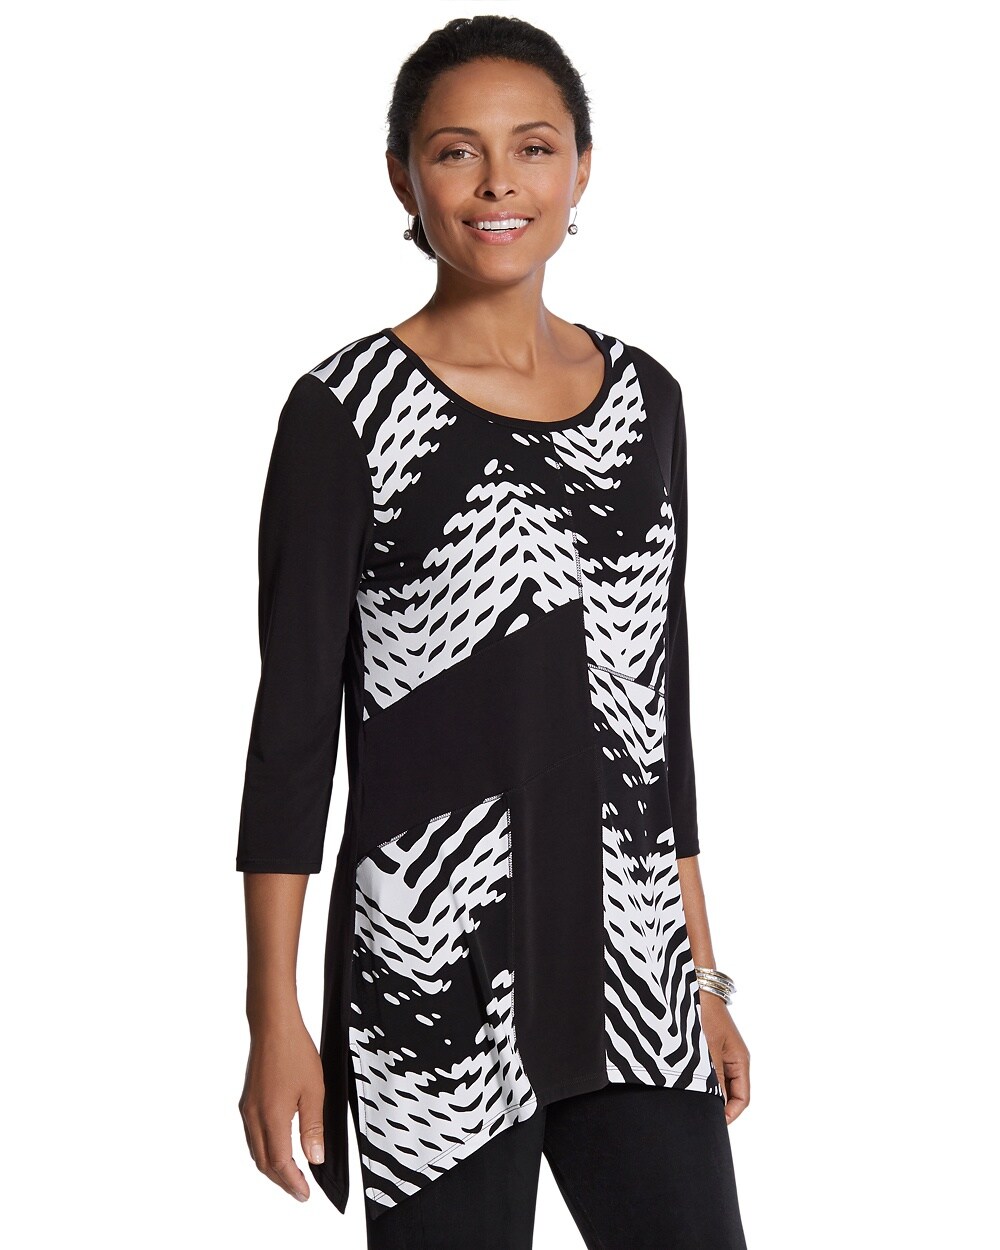 Travelers Classic Abstract Top